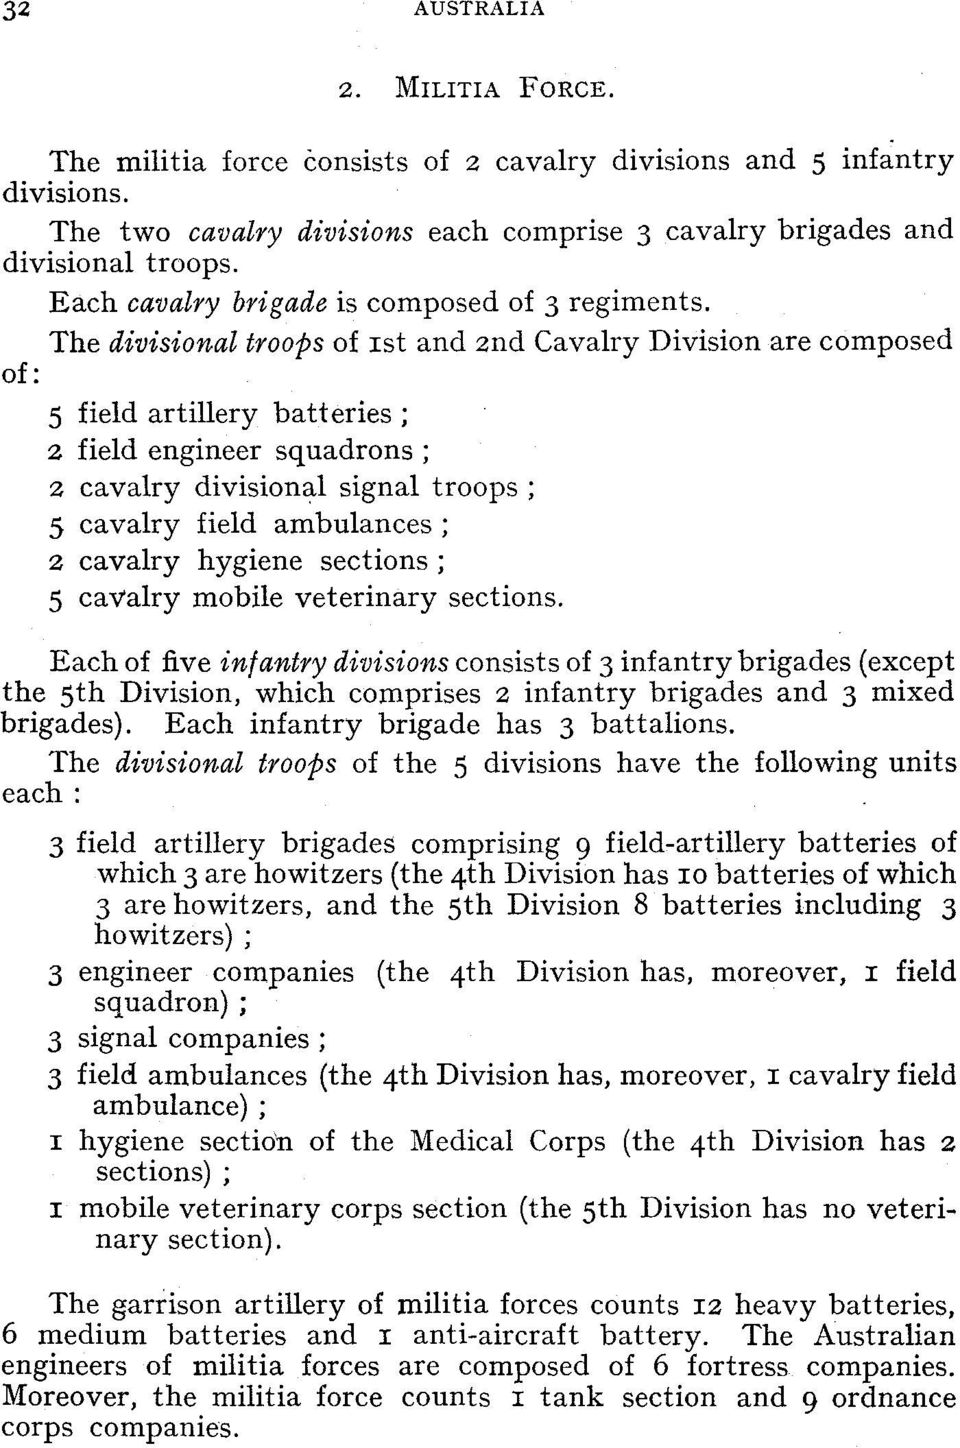 The divisional troops of ist and 2nd Cavalry Division are composed of: 5 field artillery batteries; 2 field engineer squadrons; 2 cavalry divisional signal troops; 5 cavalry field ambulances; z